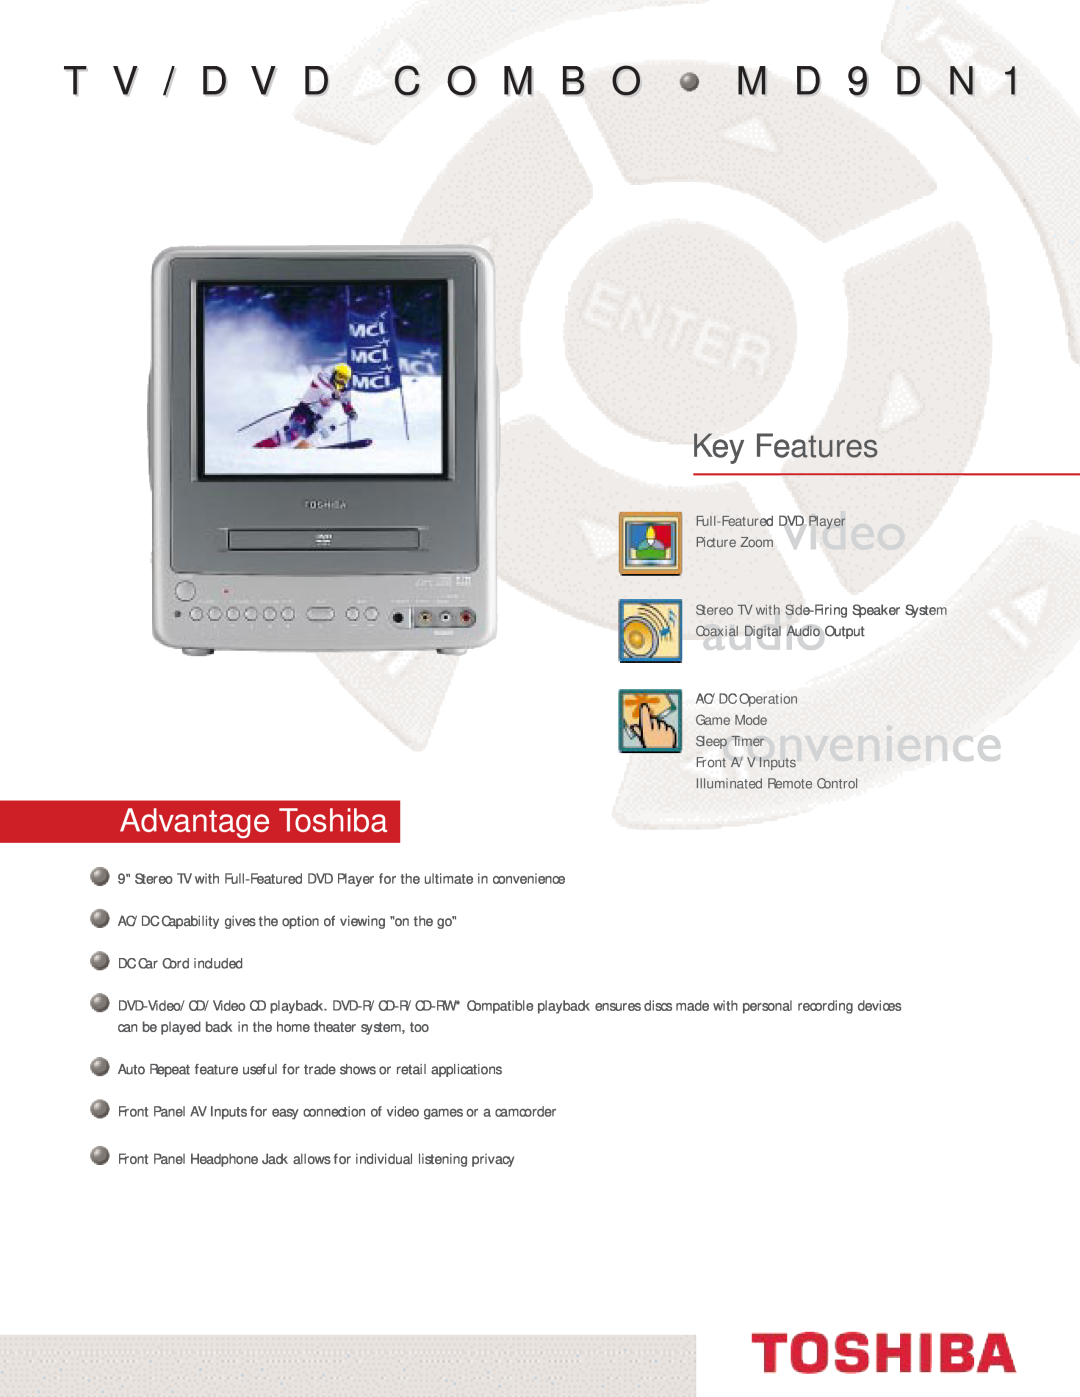 Toshiba MD9DN1 manual Key Features, SleepconvenienceTimer, T V / D V D C O M B O M D 9 D N, Advantage Toshiba 